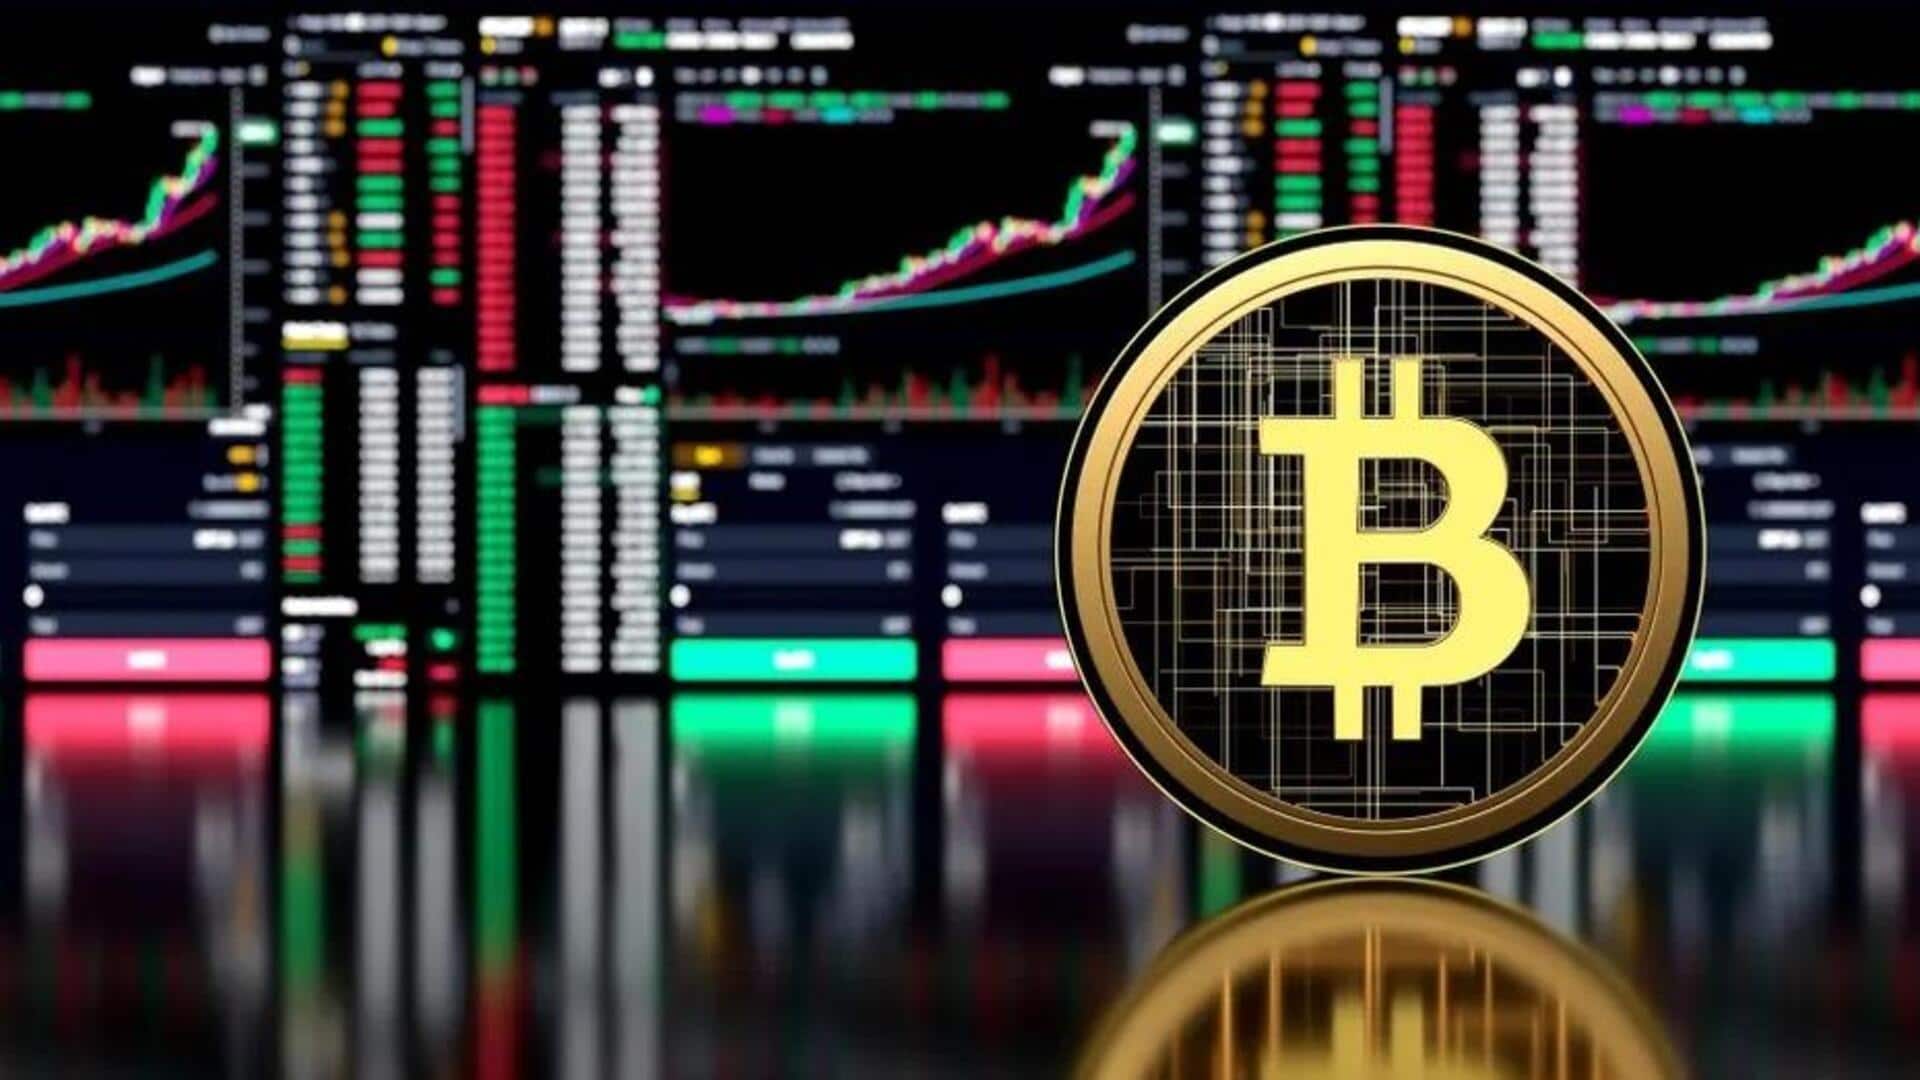 Cryptocurrency prices today: Check rates of Bitcoin, Solana, BNB, Tether